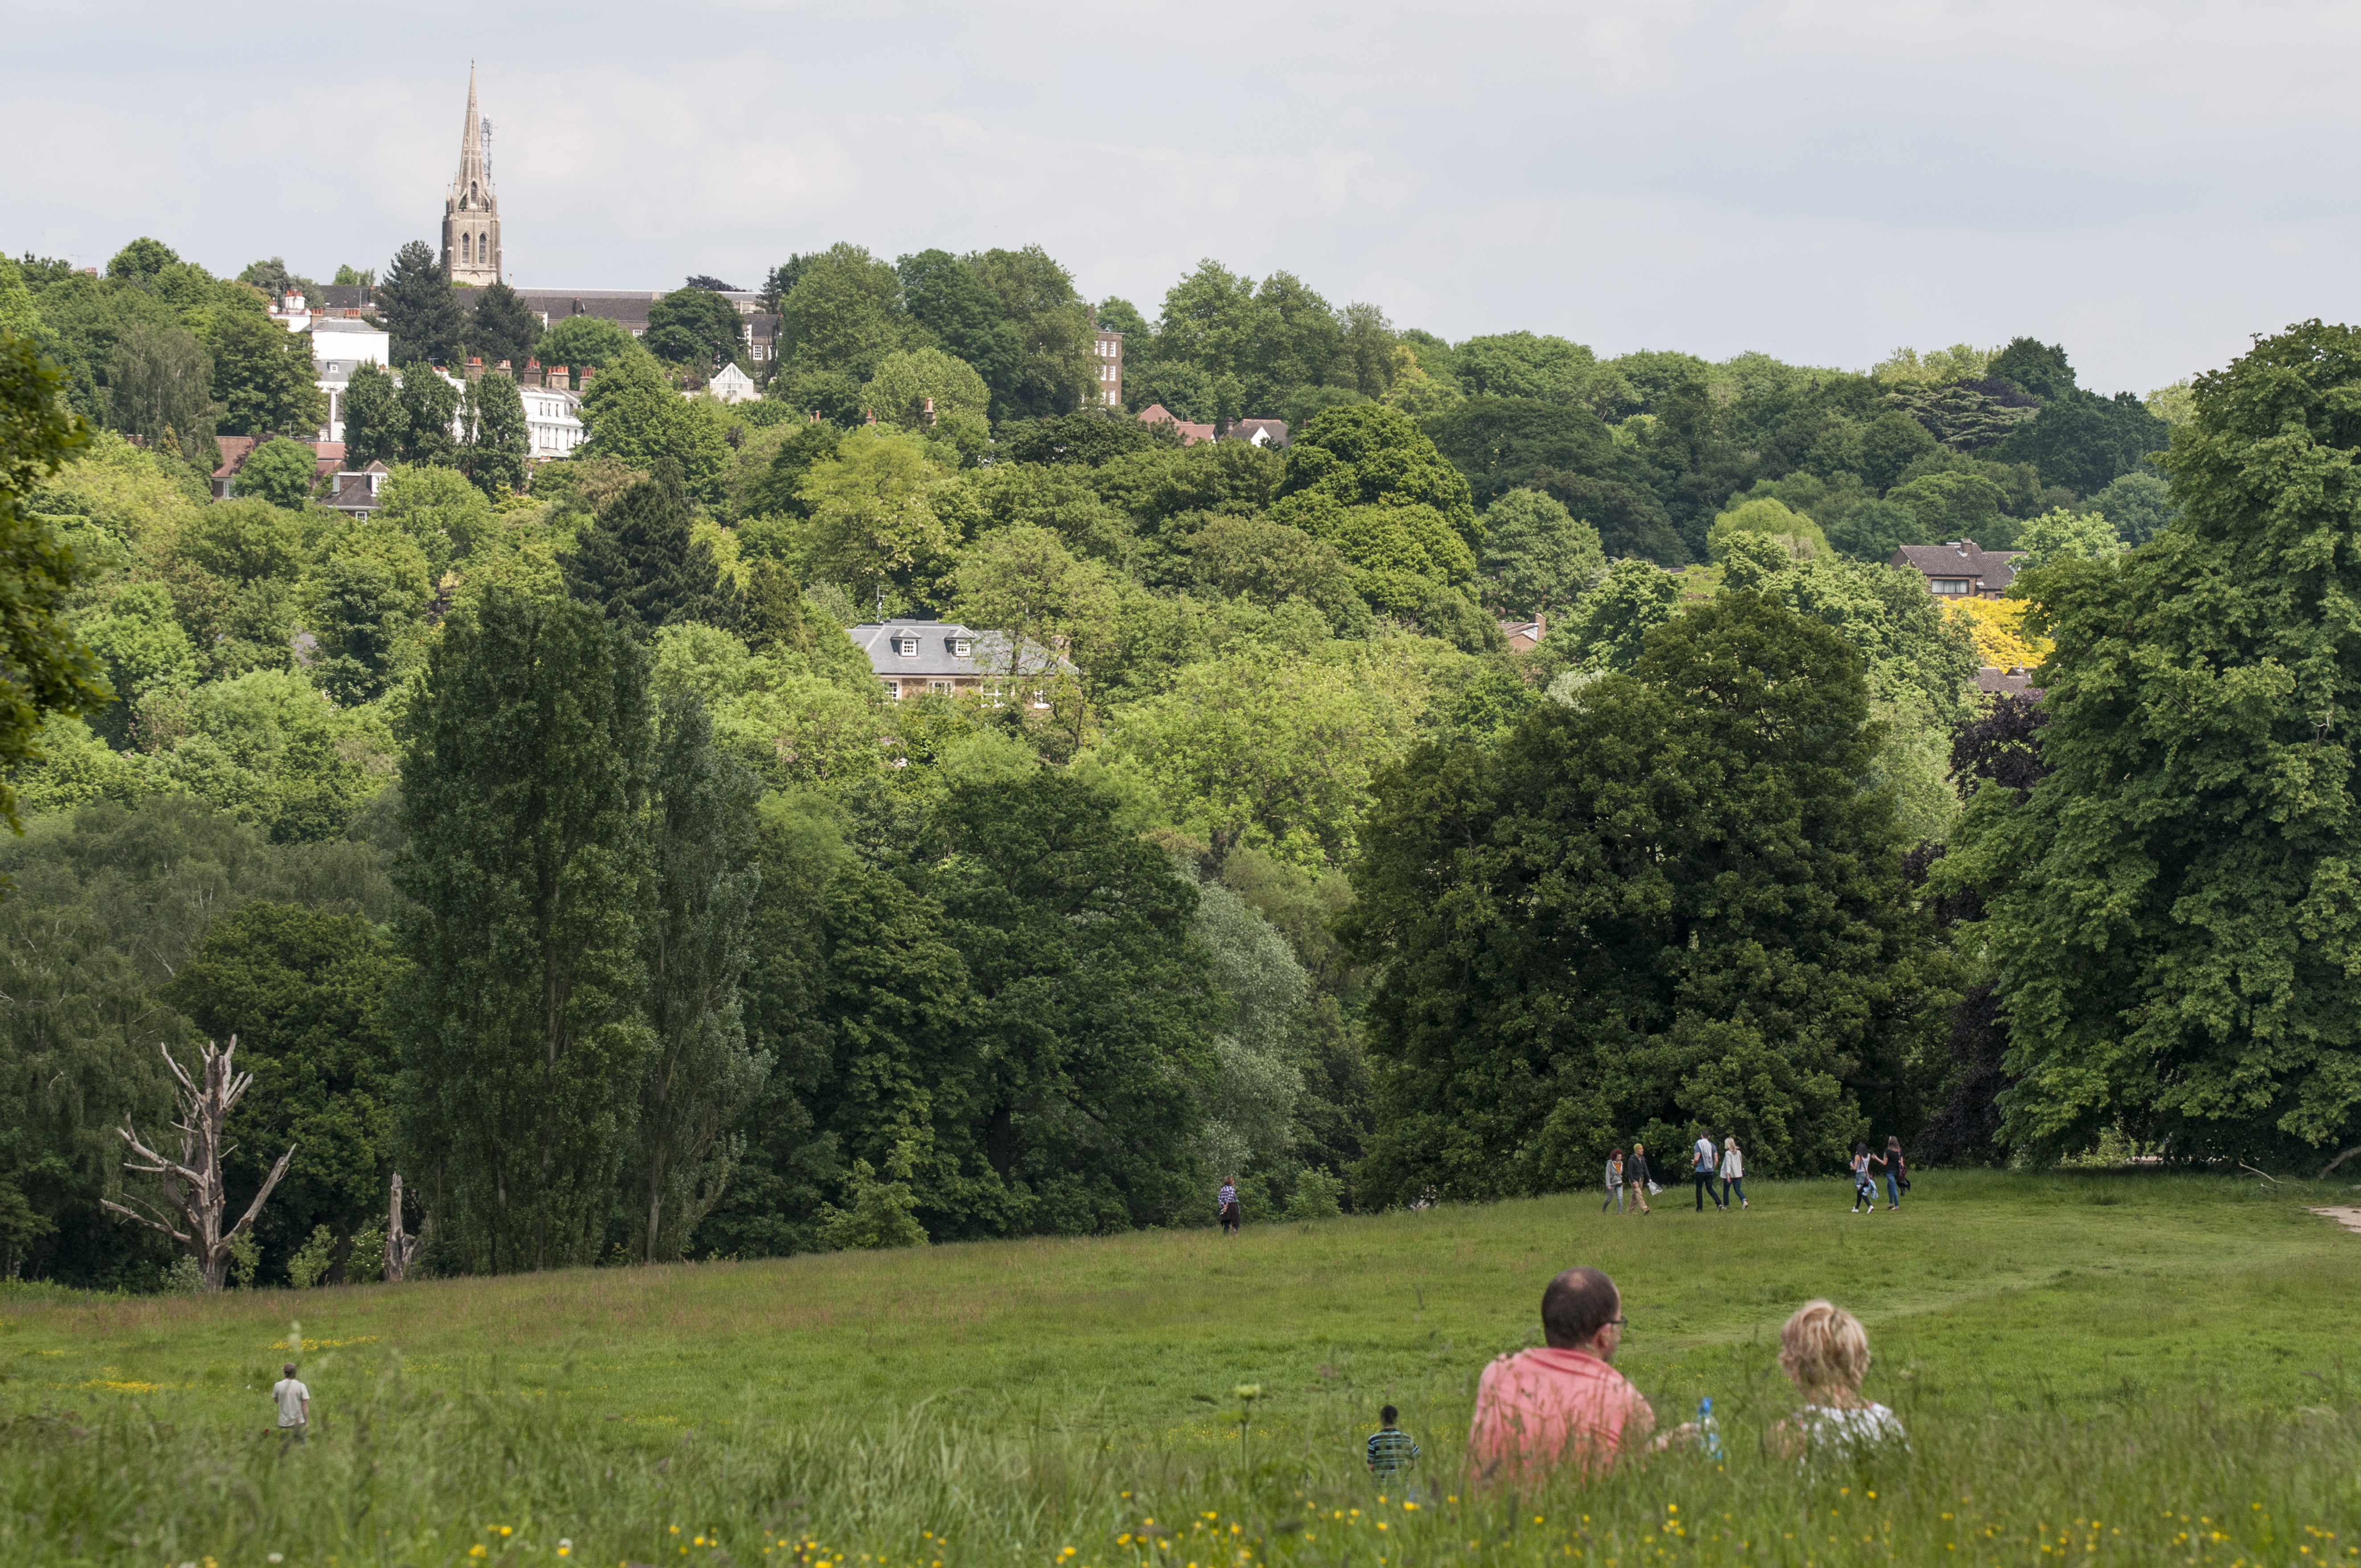 Hampstead Heath | London, England Attractions - Lonely Planet